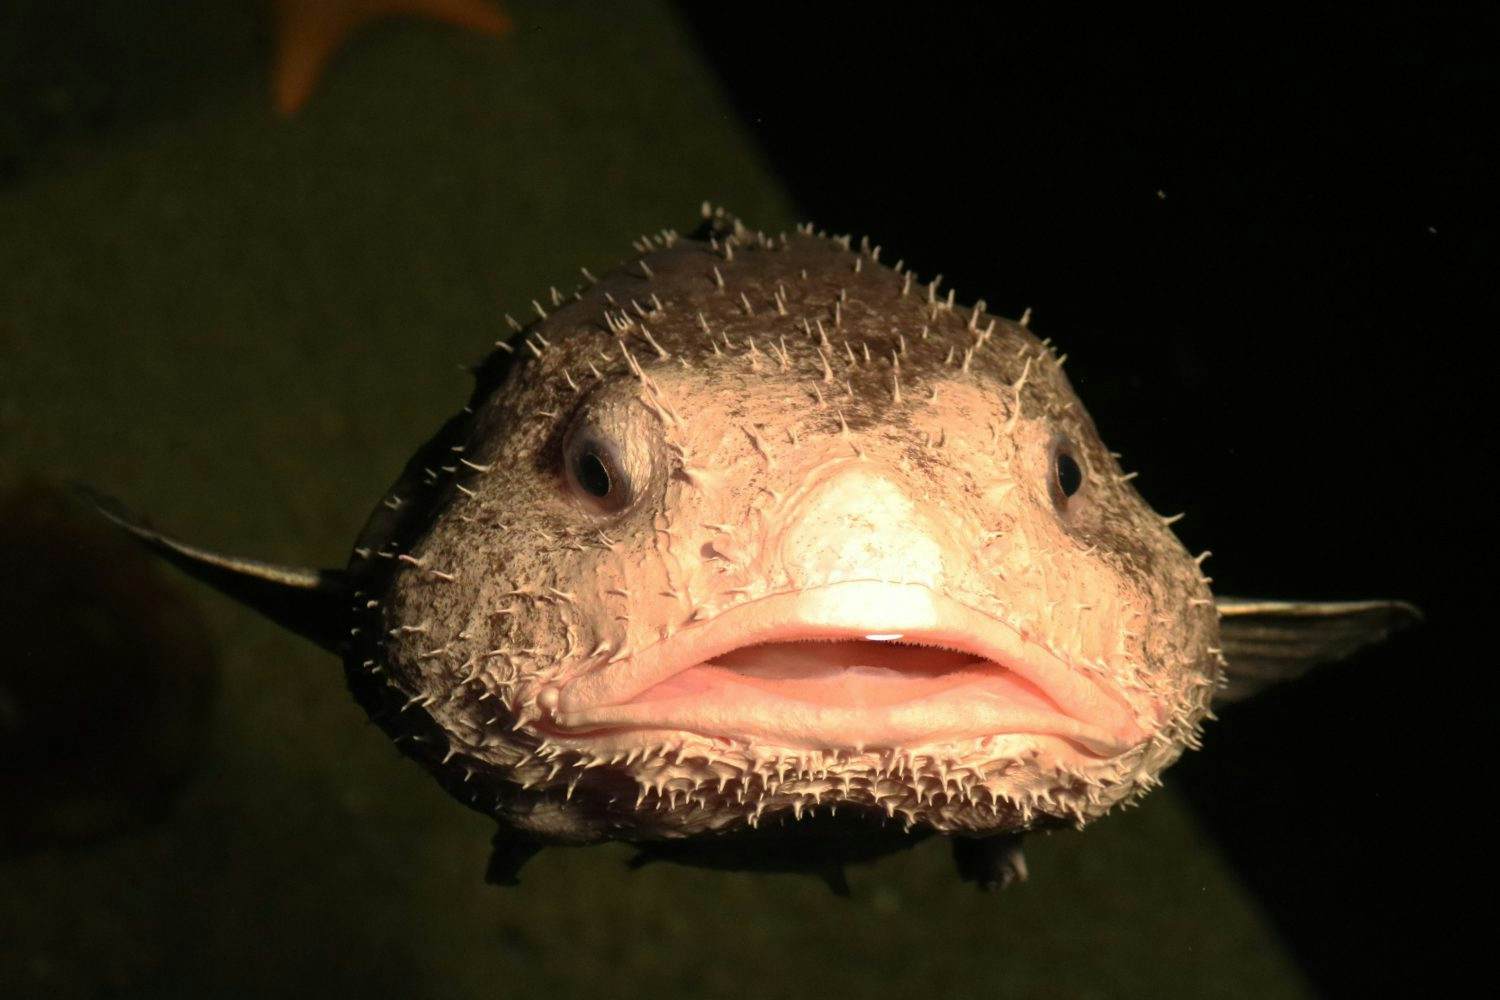 World's ugliest animal' contest took a blobfish out of water